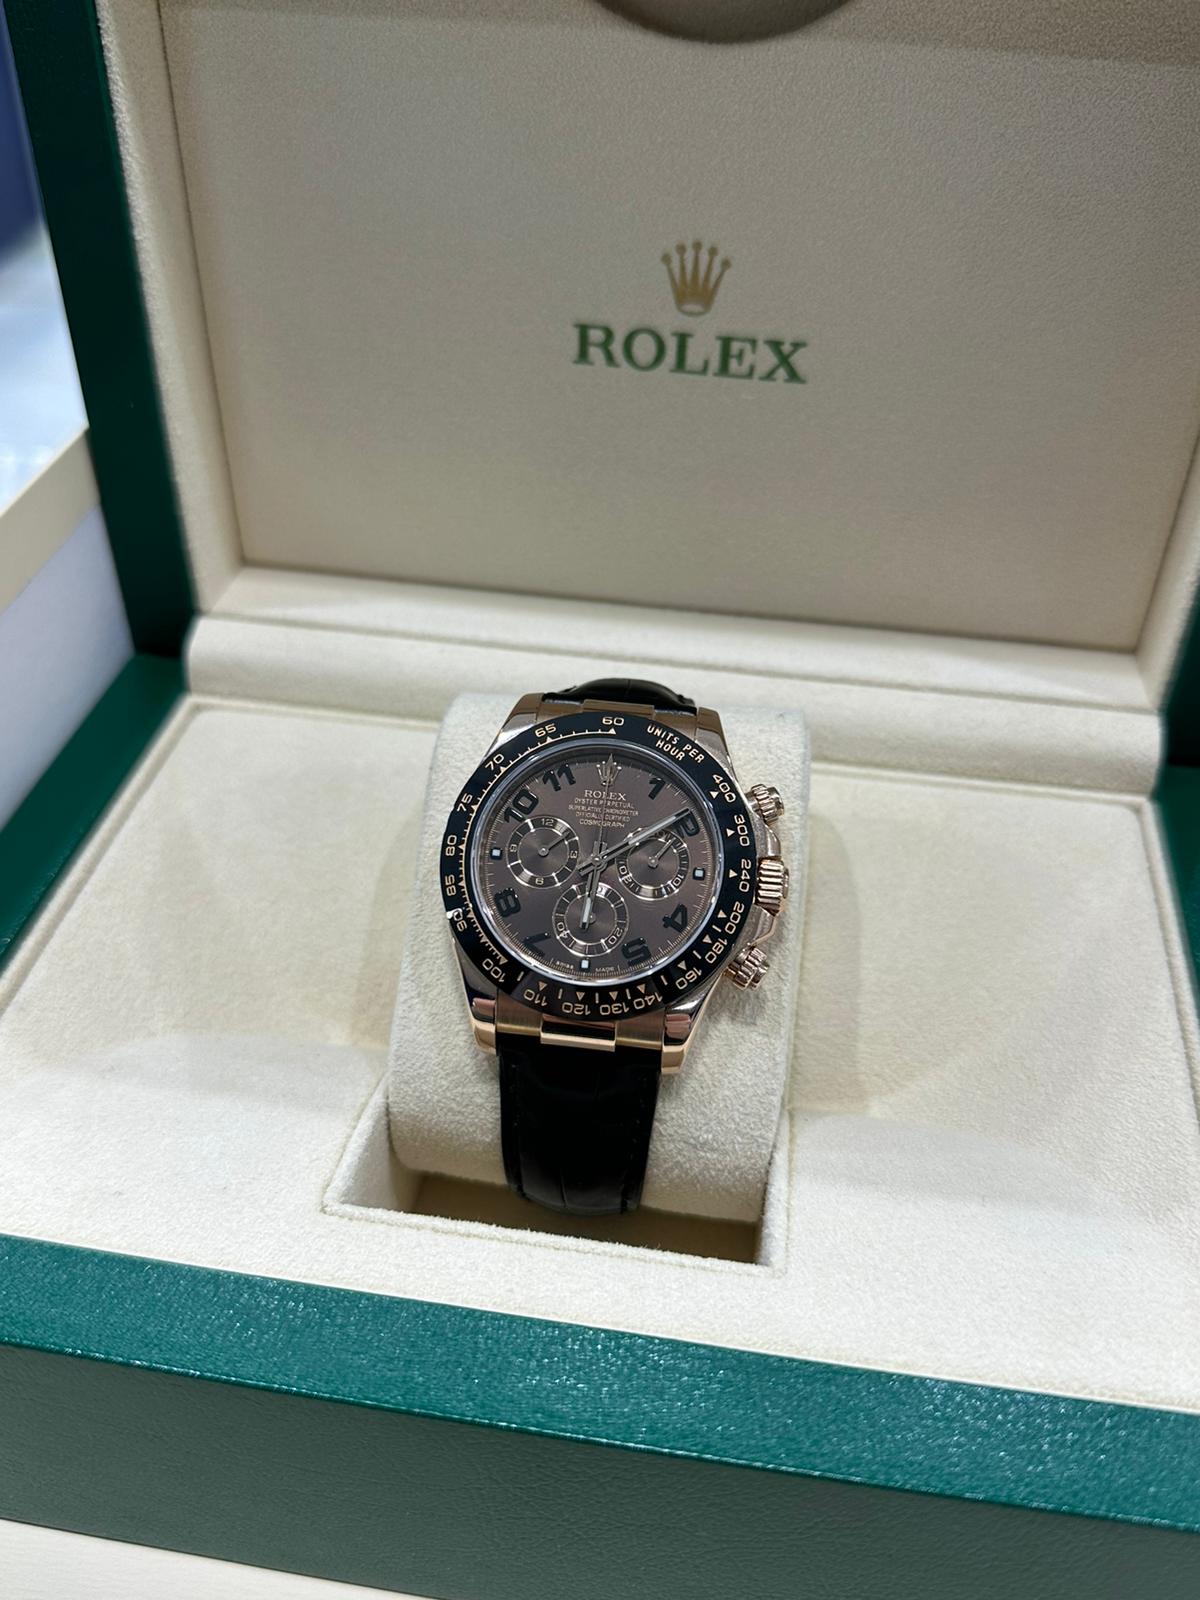 Rolex Daytona Chocolate with Leather bracelet 116515LN 2013 with box and papers. - Image 6 of 8